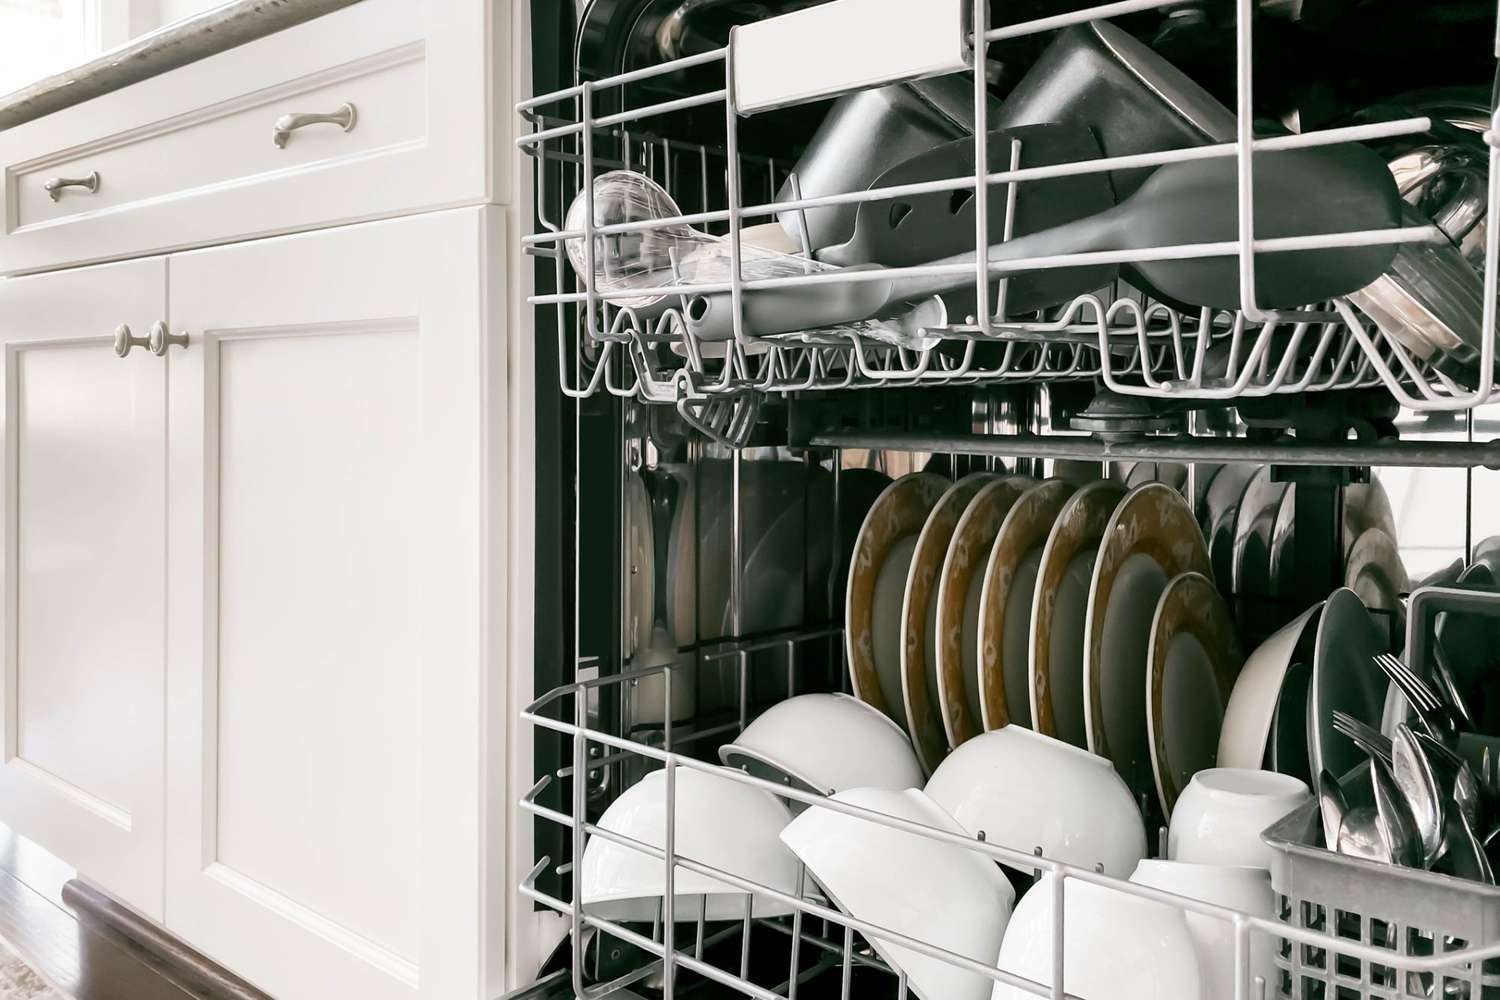 Dirty Dishes in Dishwasher